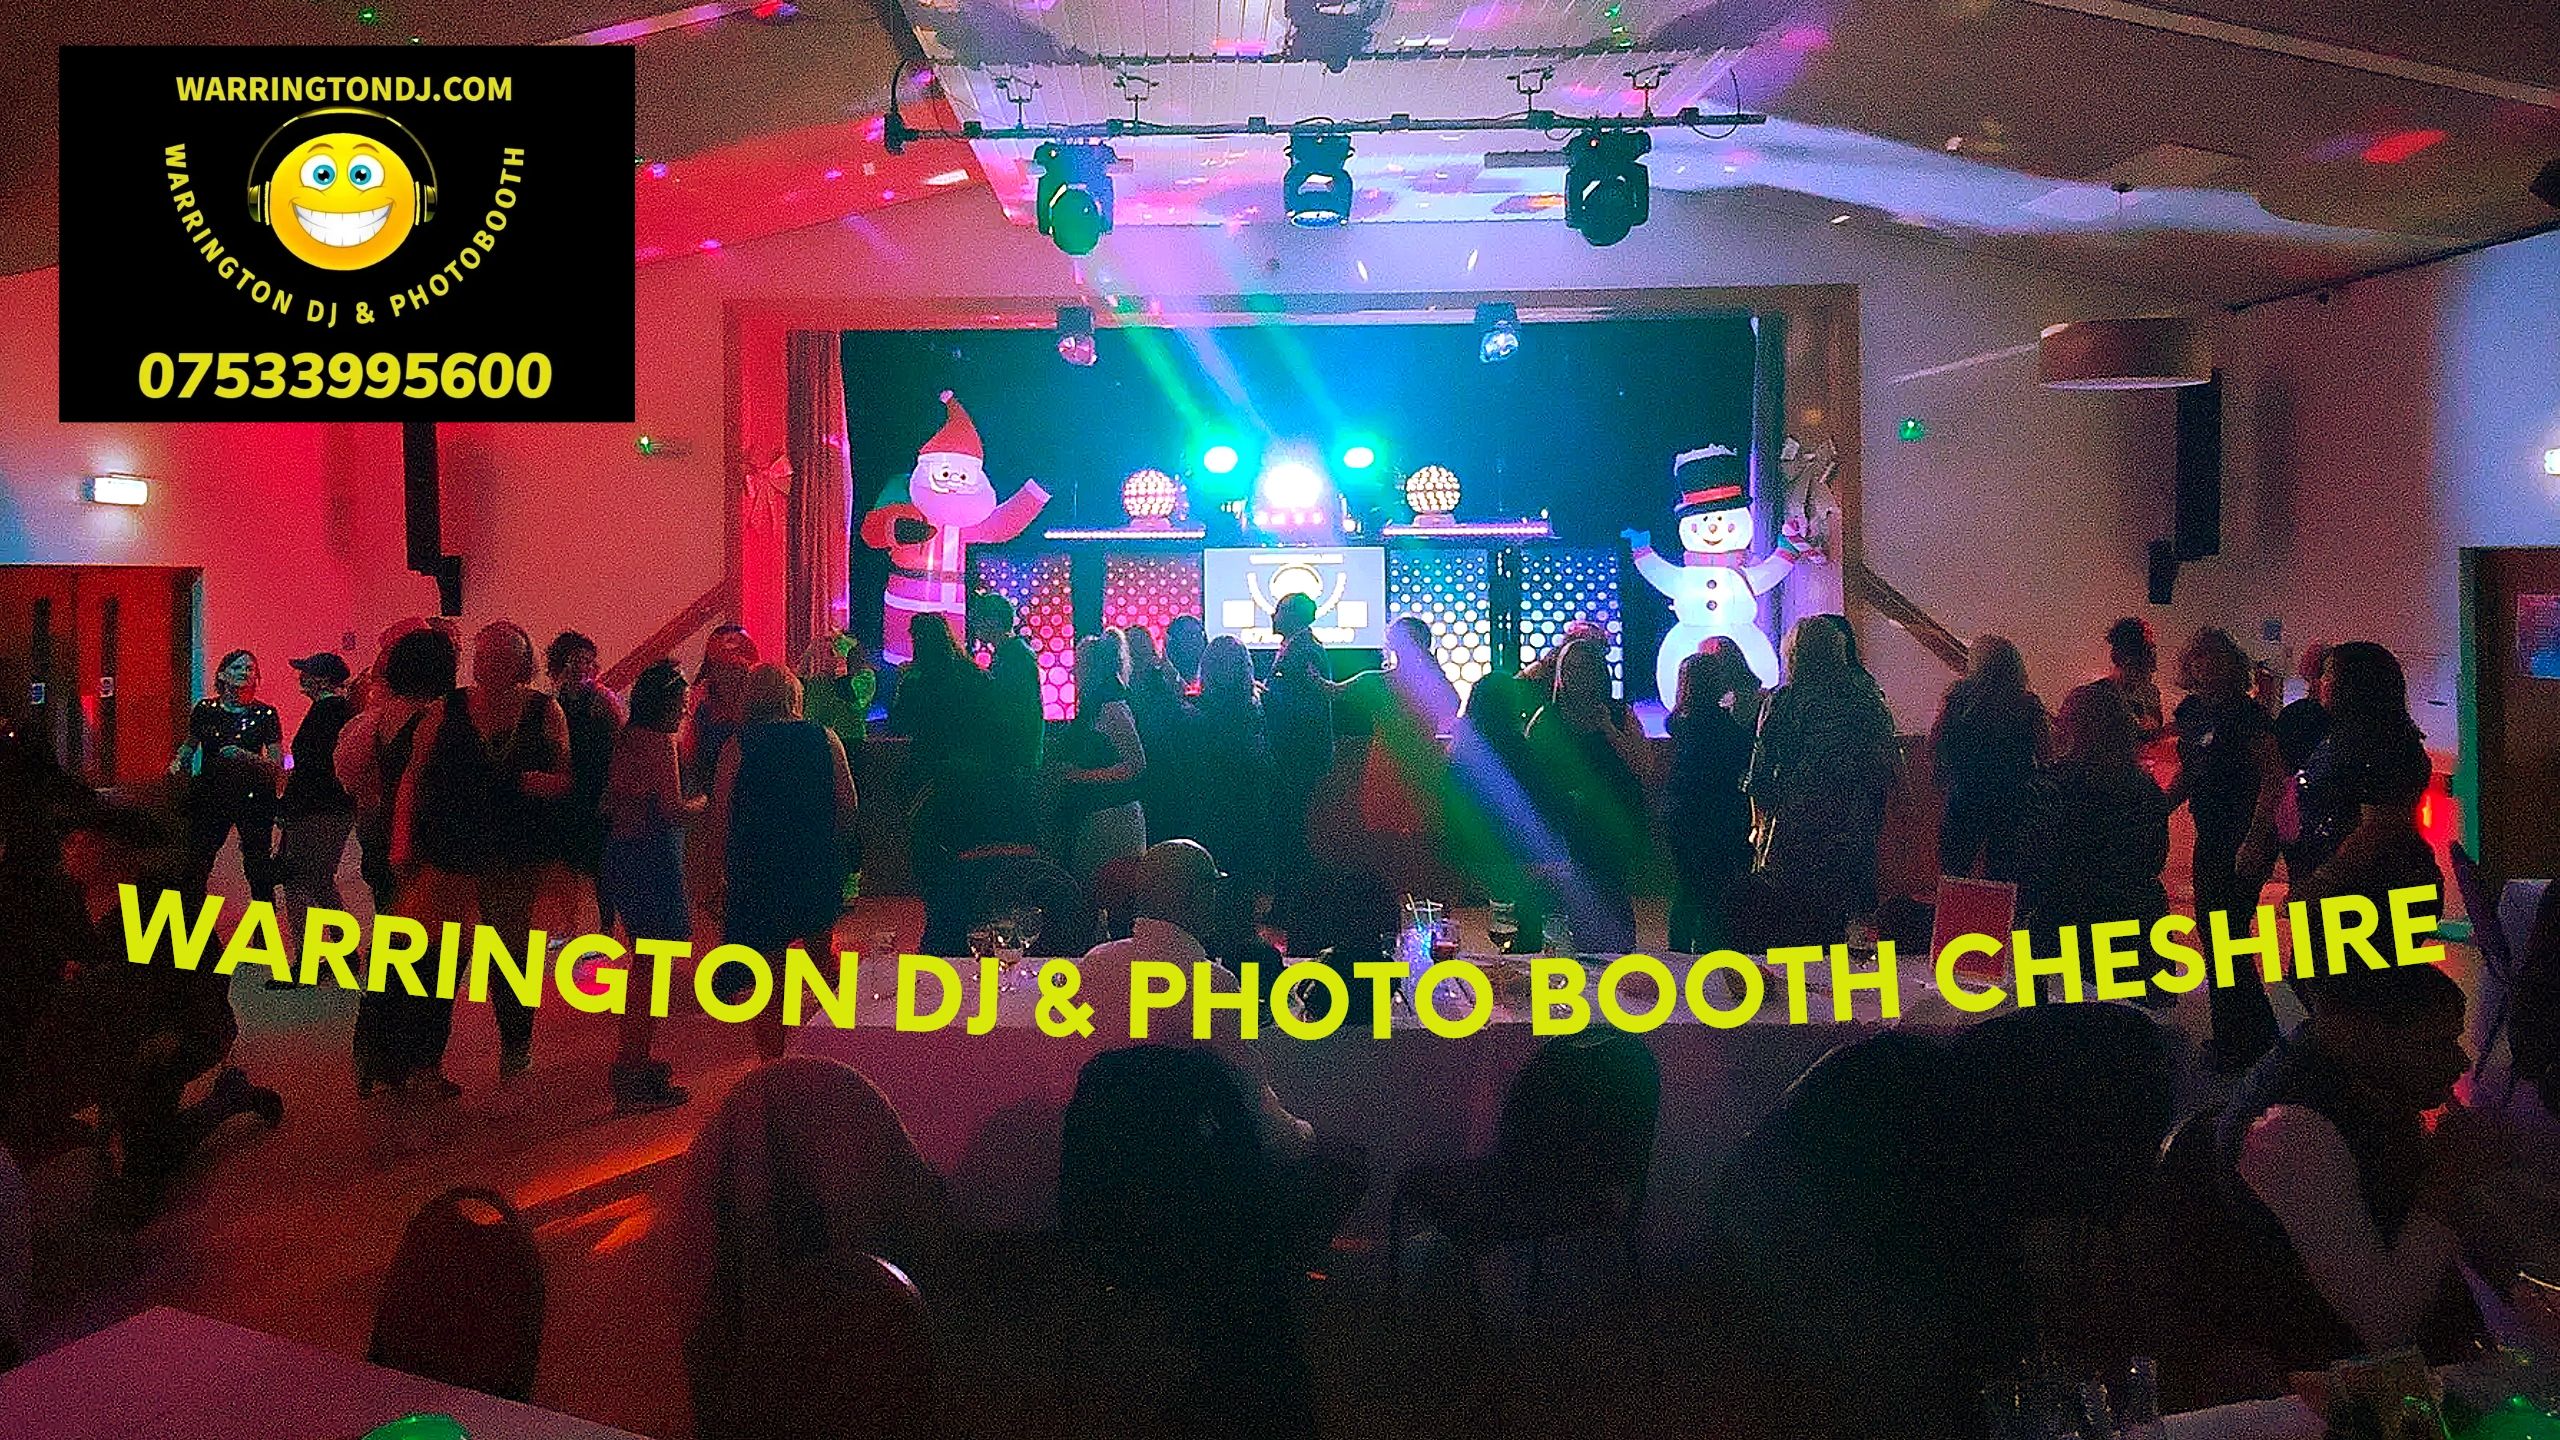 Warrington dj and photo booth Cheshire Andy riley